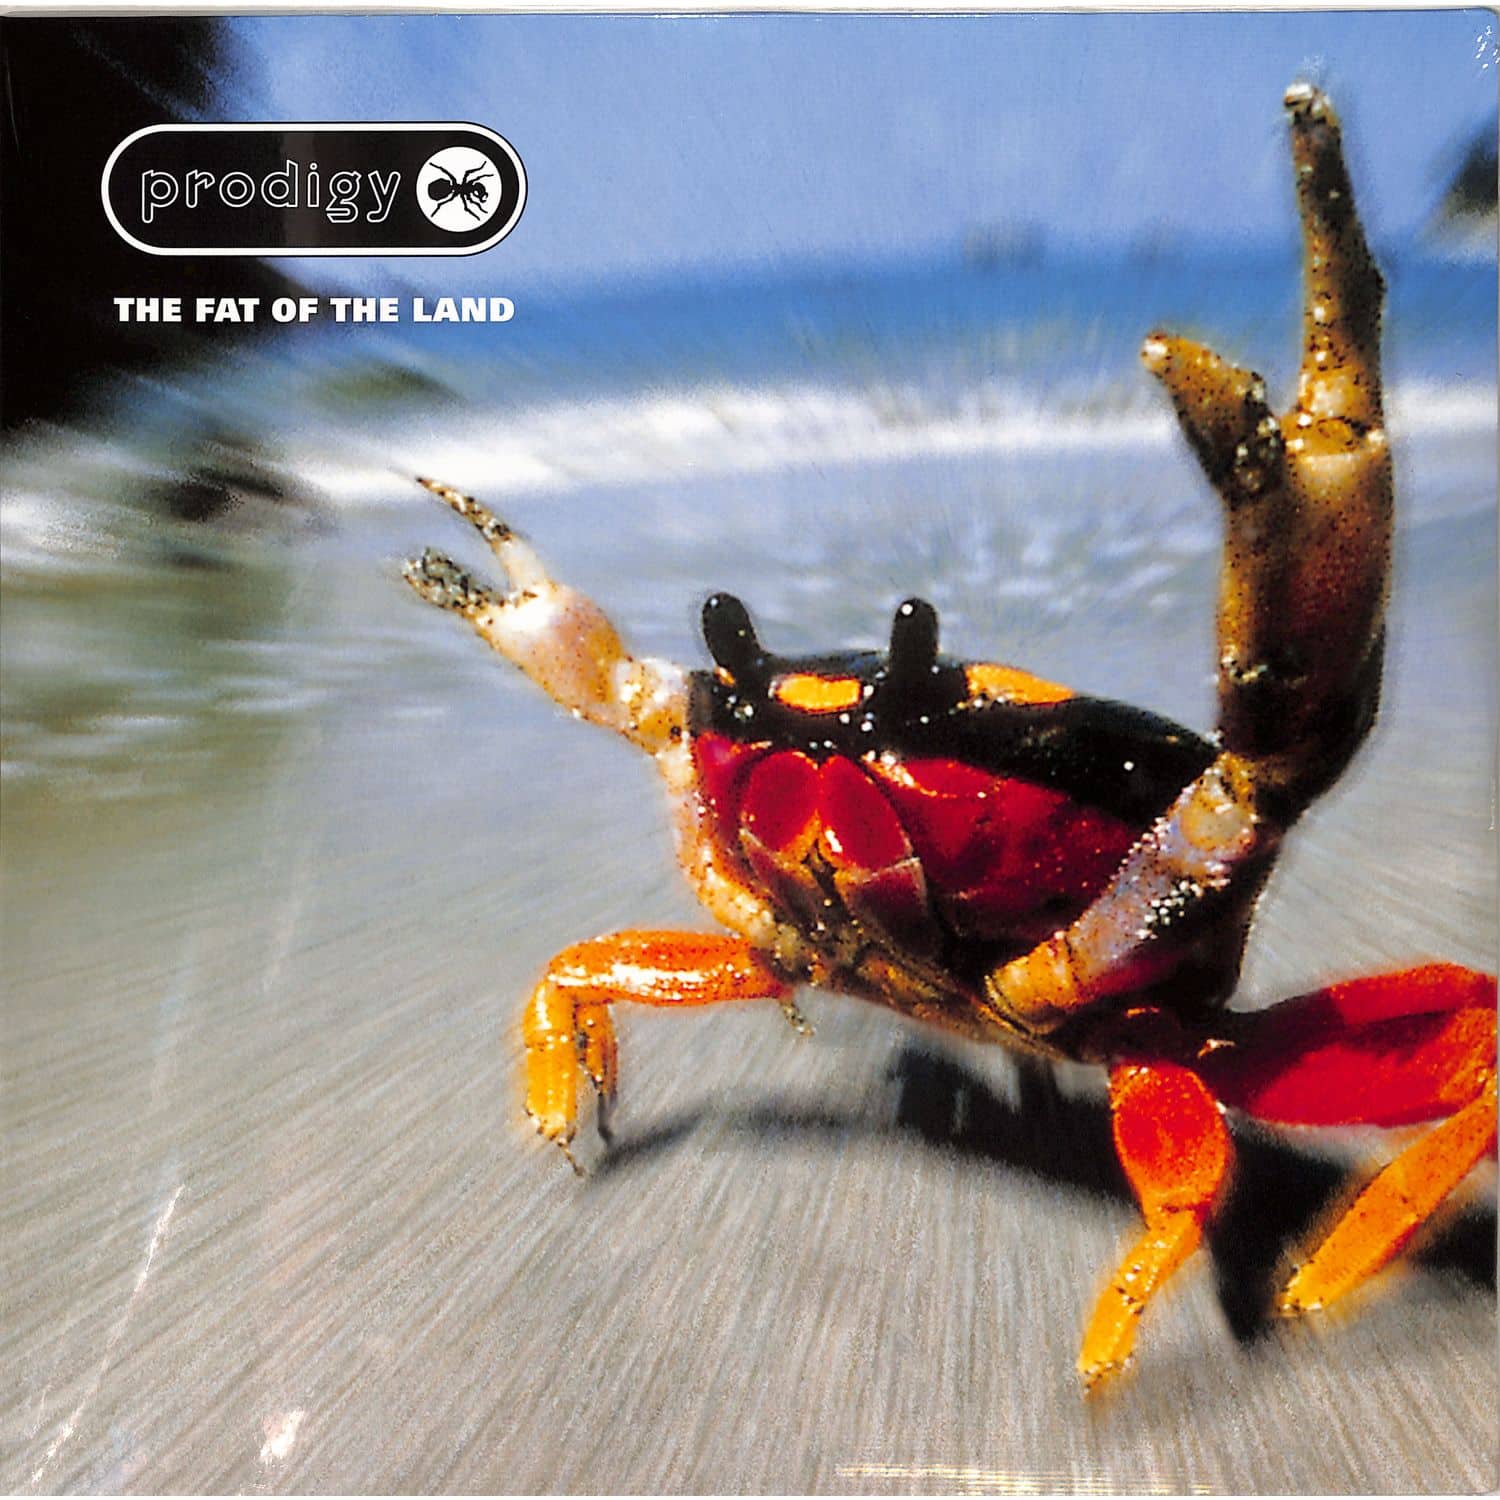 The Prodigy - THE FAT OF THE LAND 